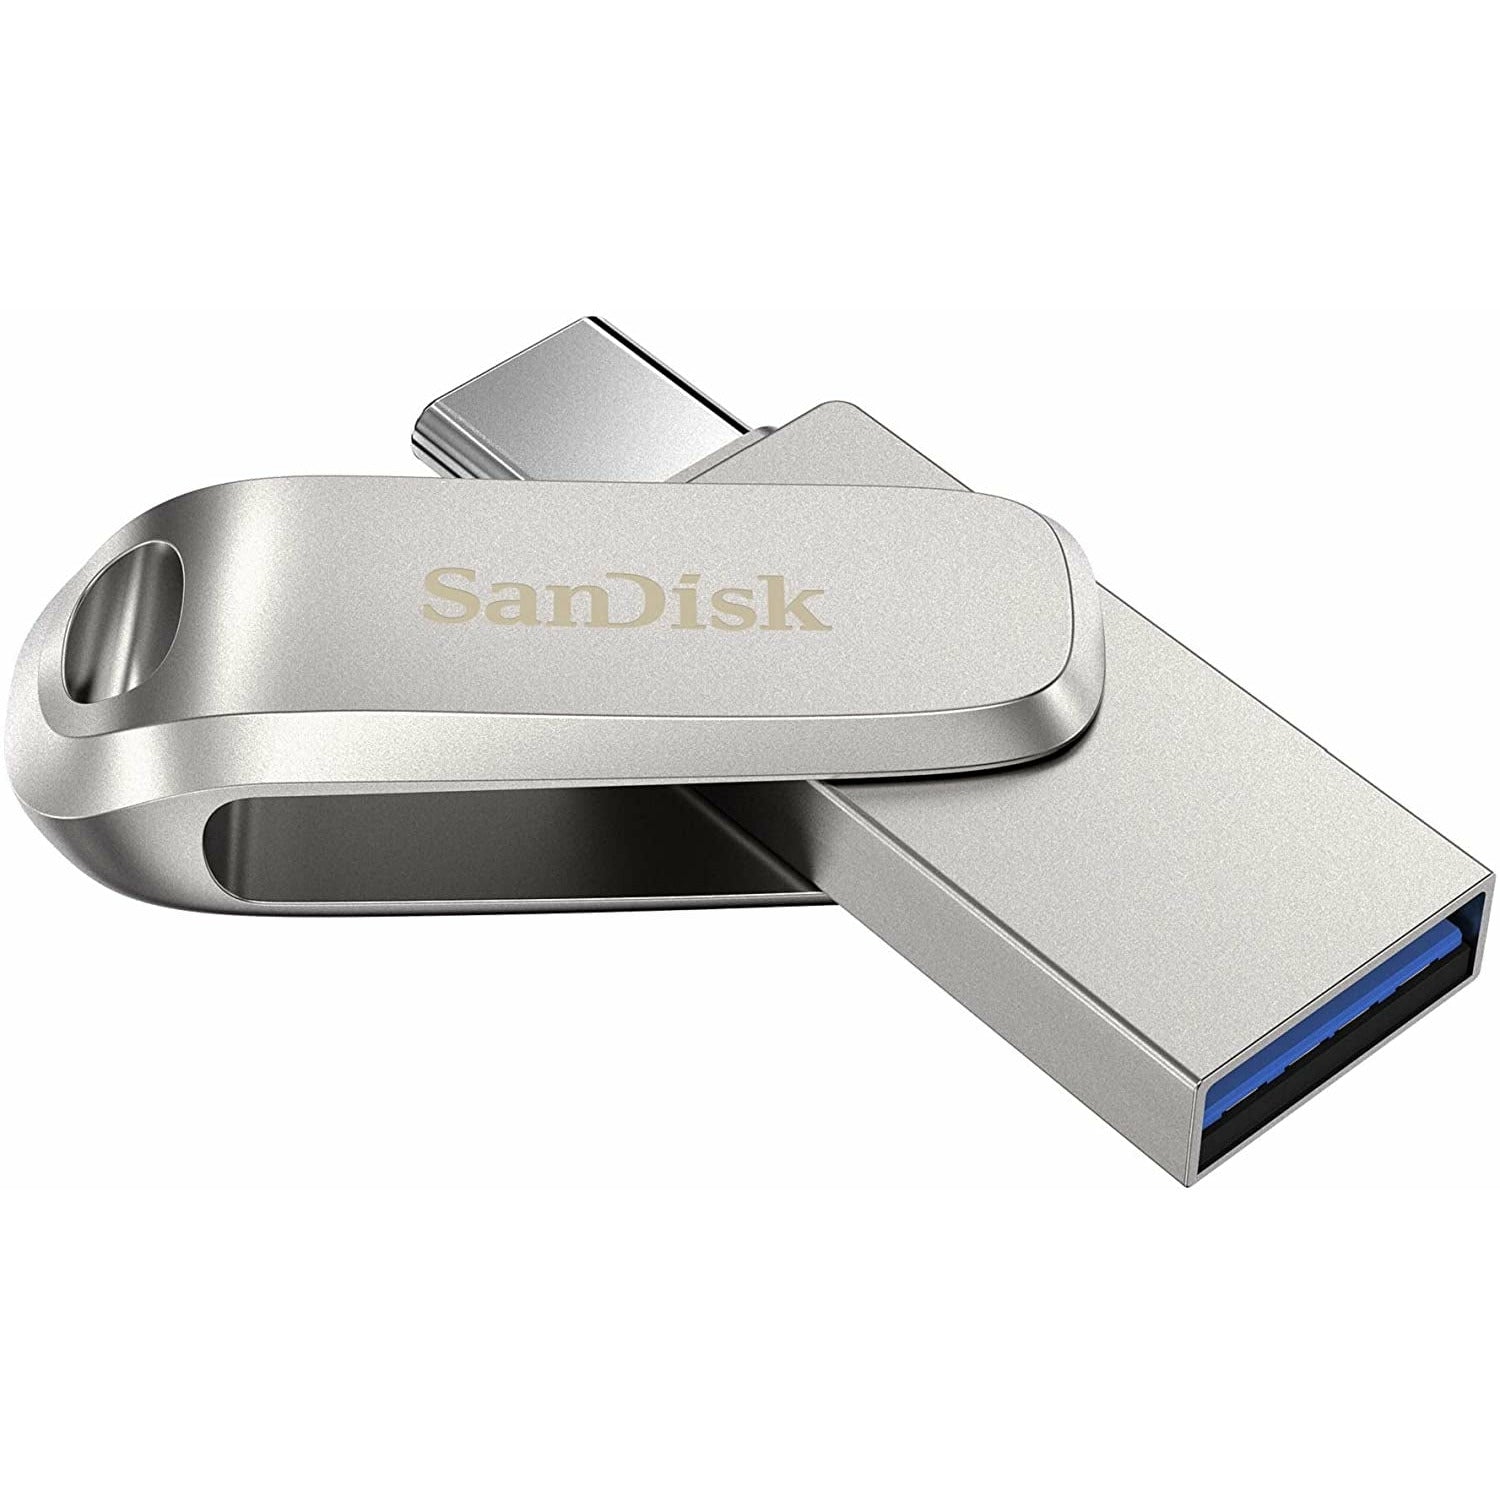 SANDISK 128G SDDDC4-128G-G46  Ultra Dual Drive Luxe USB3.1 Type-C (150MB) New